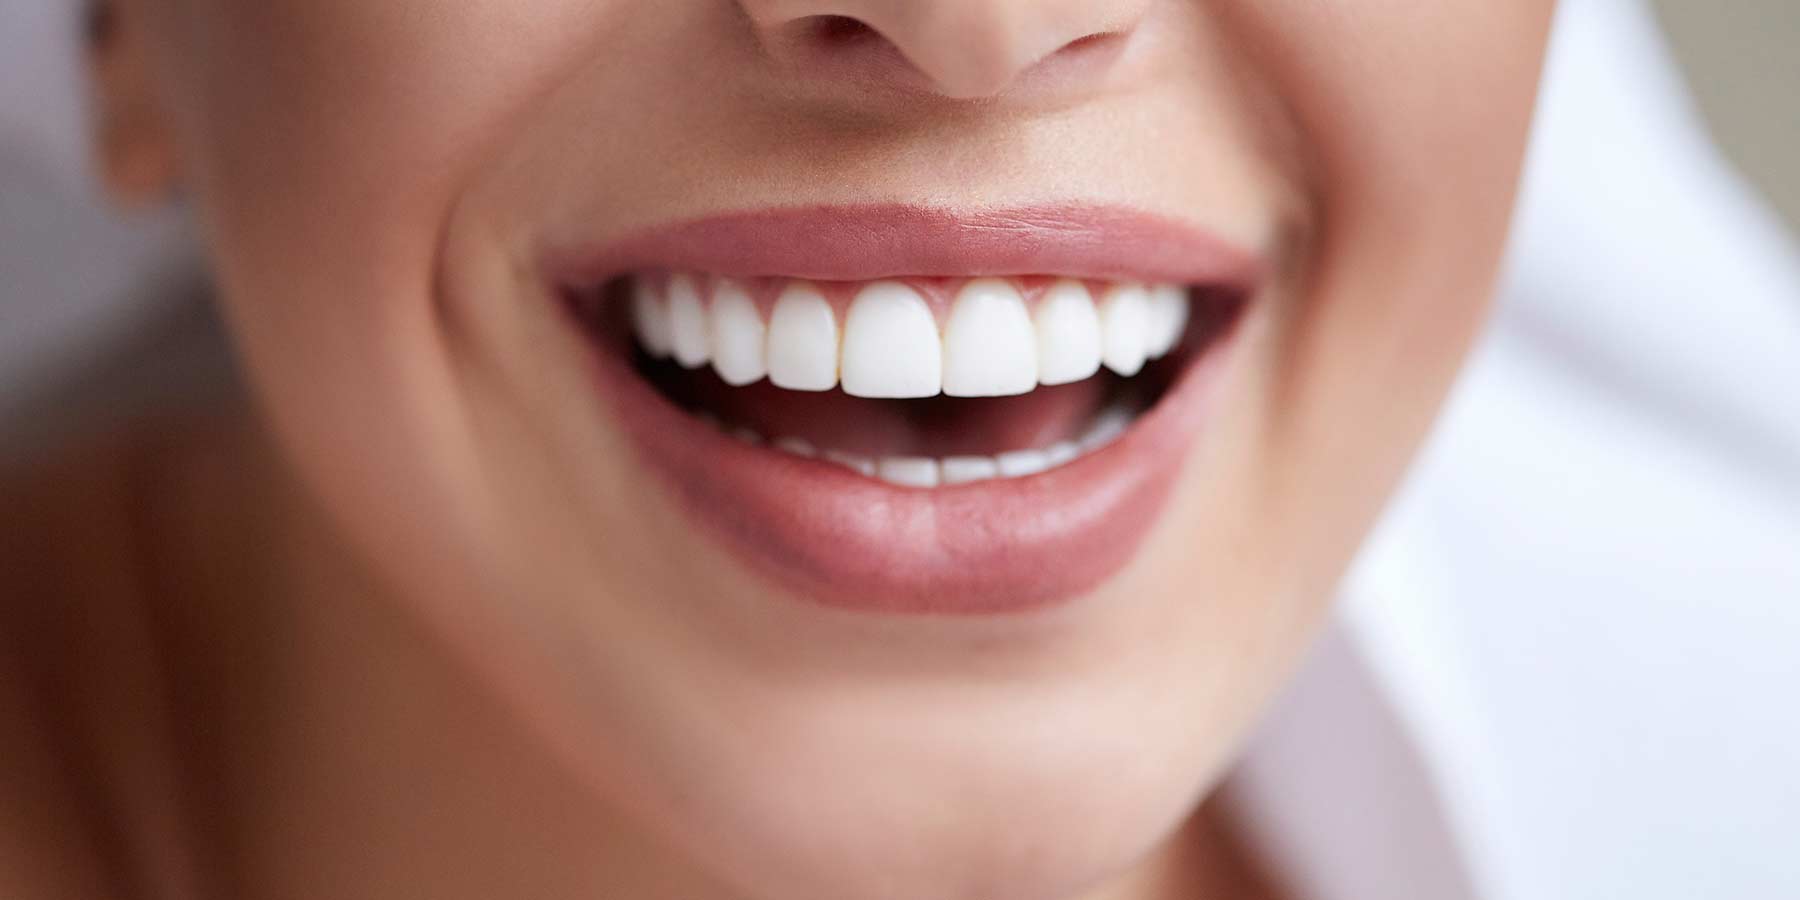 What Insurance Covers Cosmetic Dentistry?